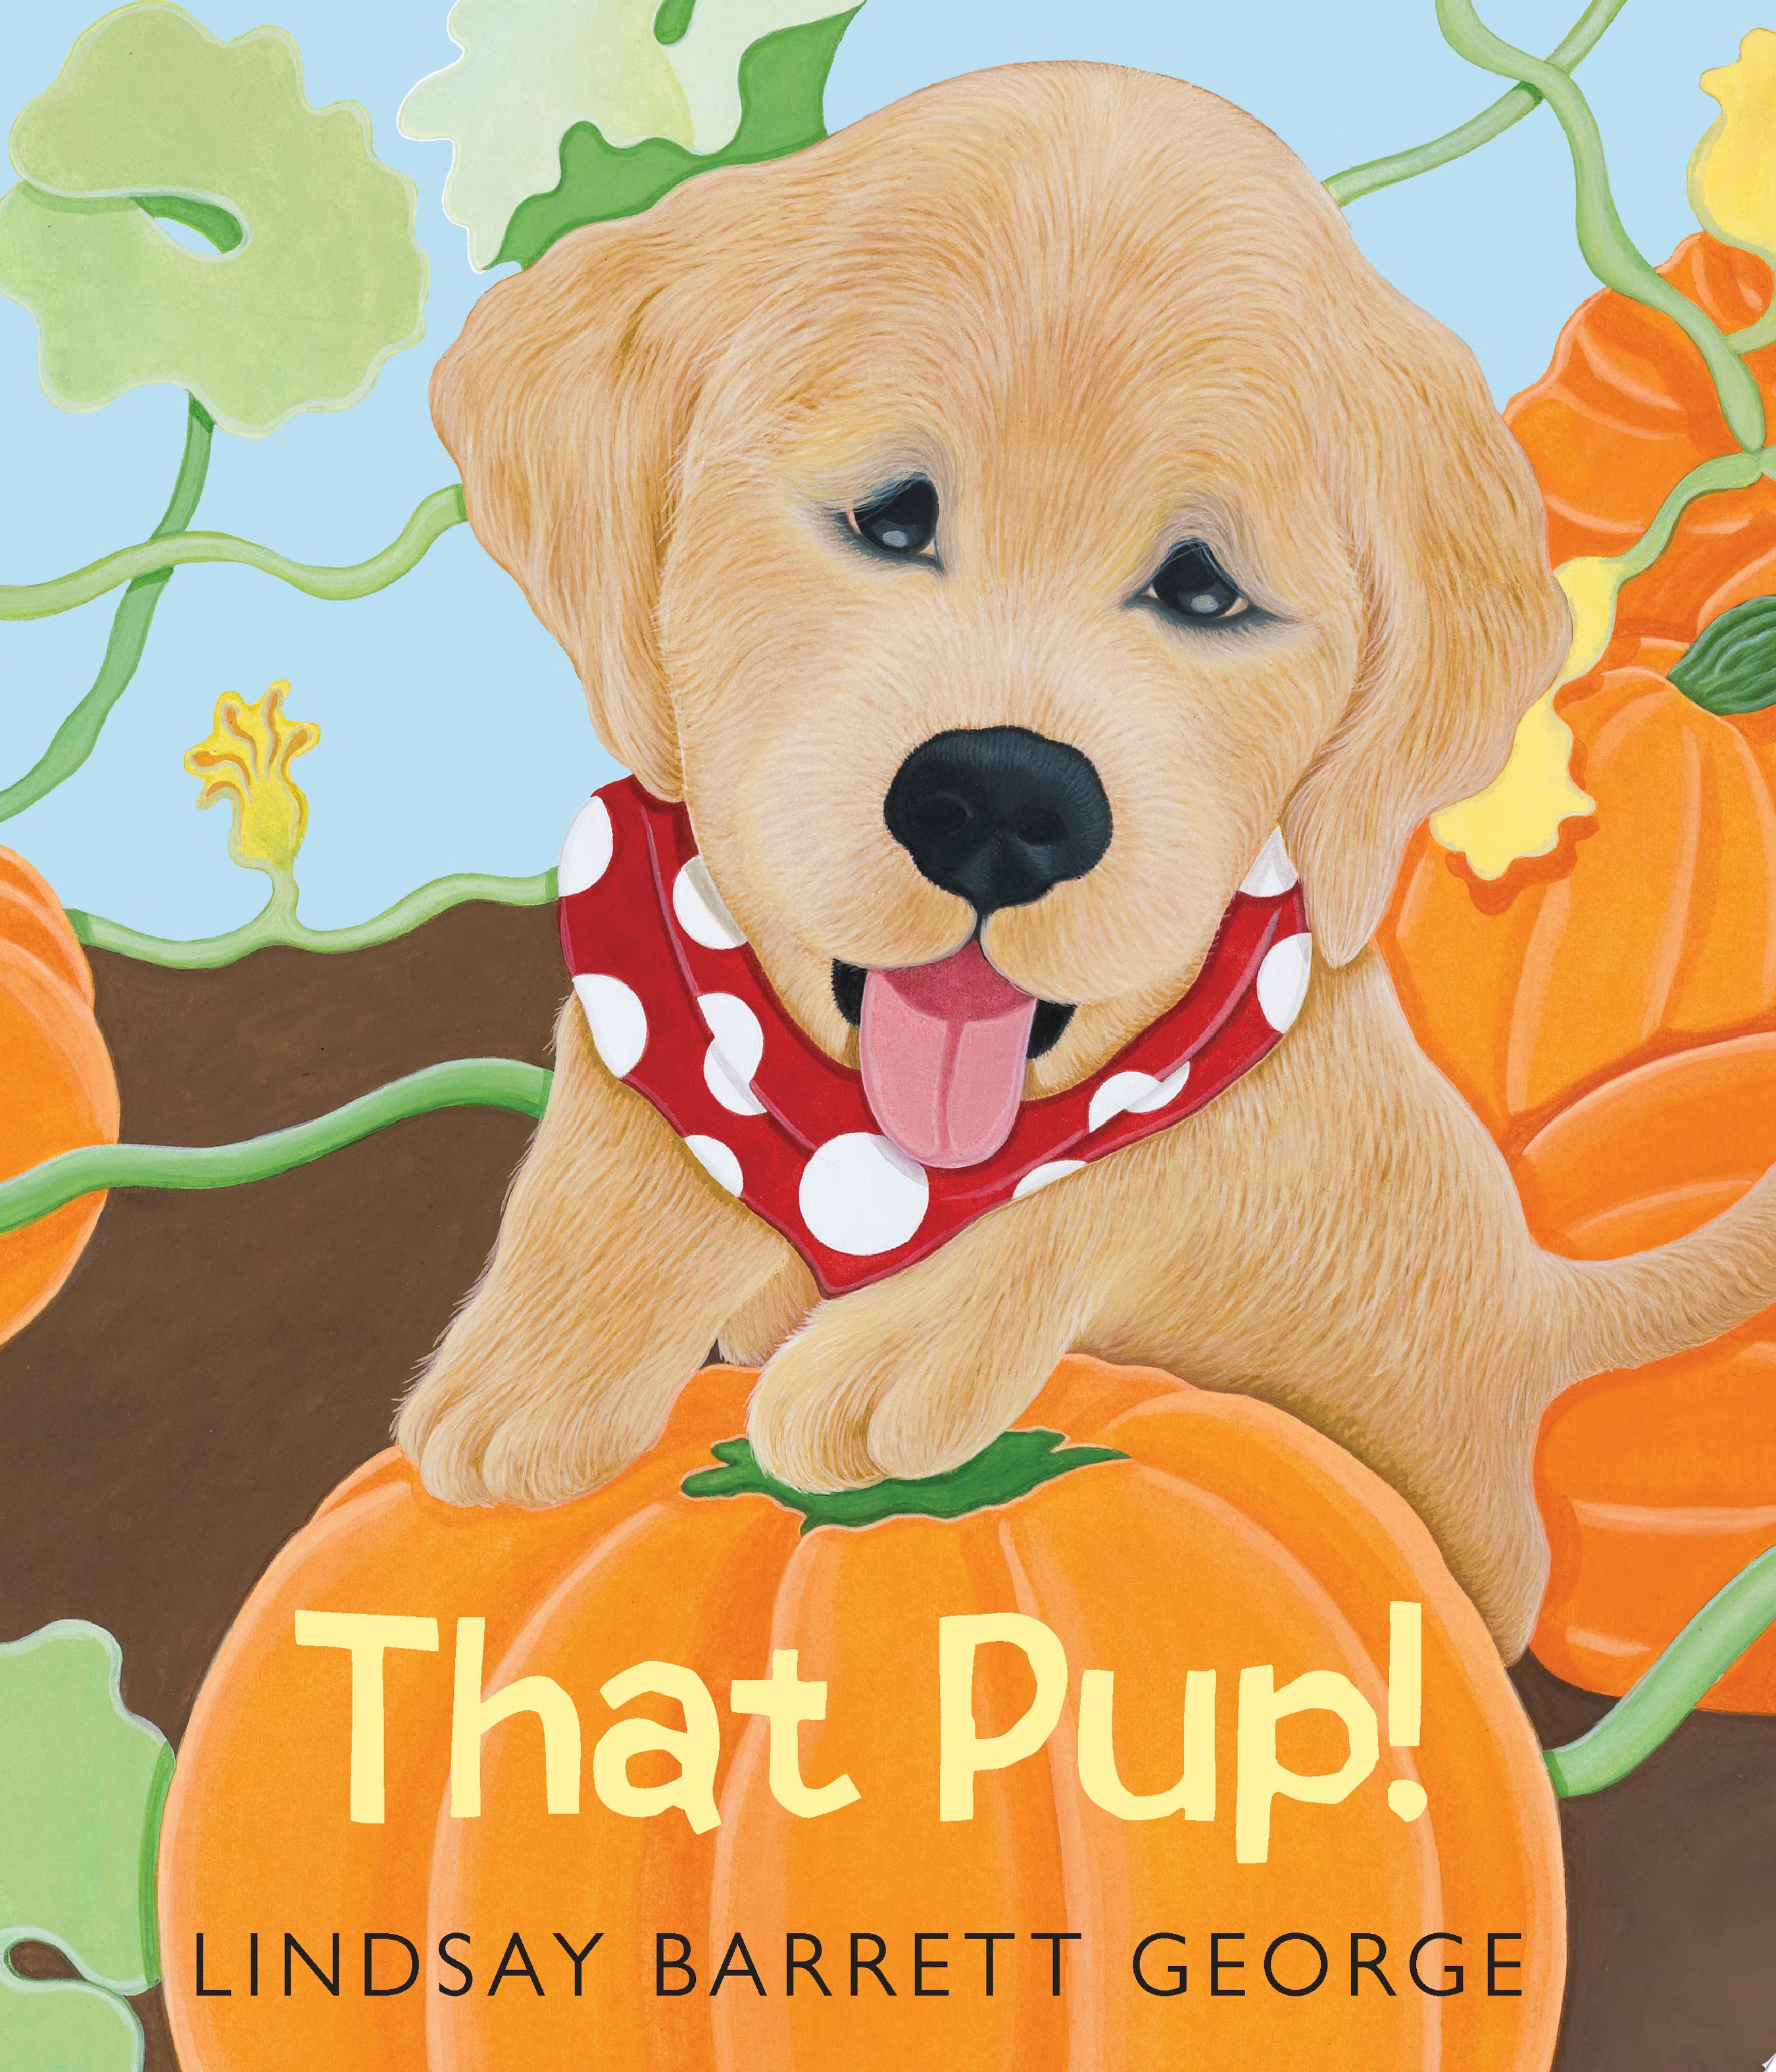 Image for "That Pup!"